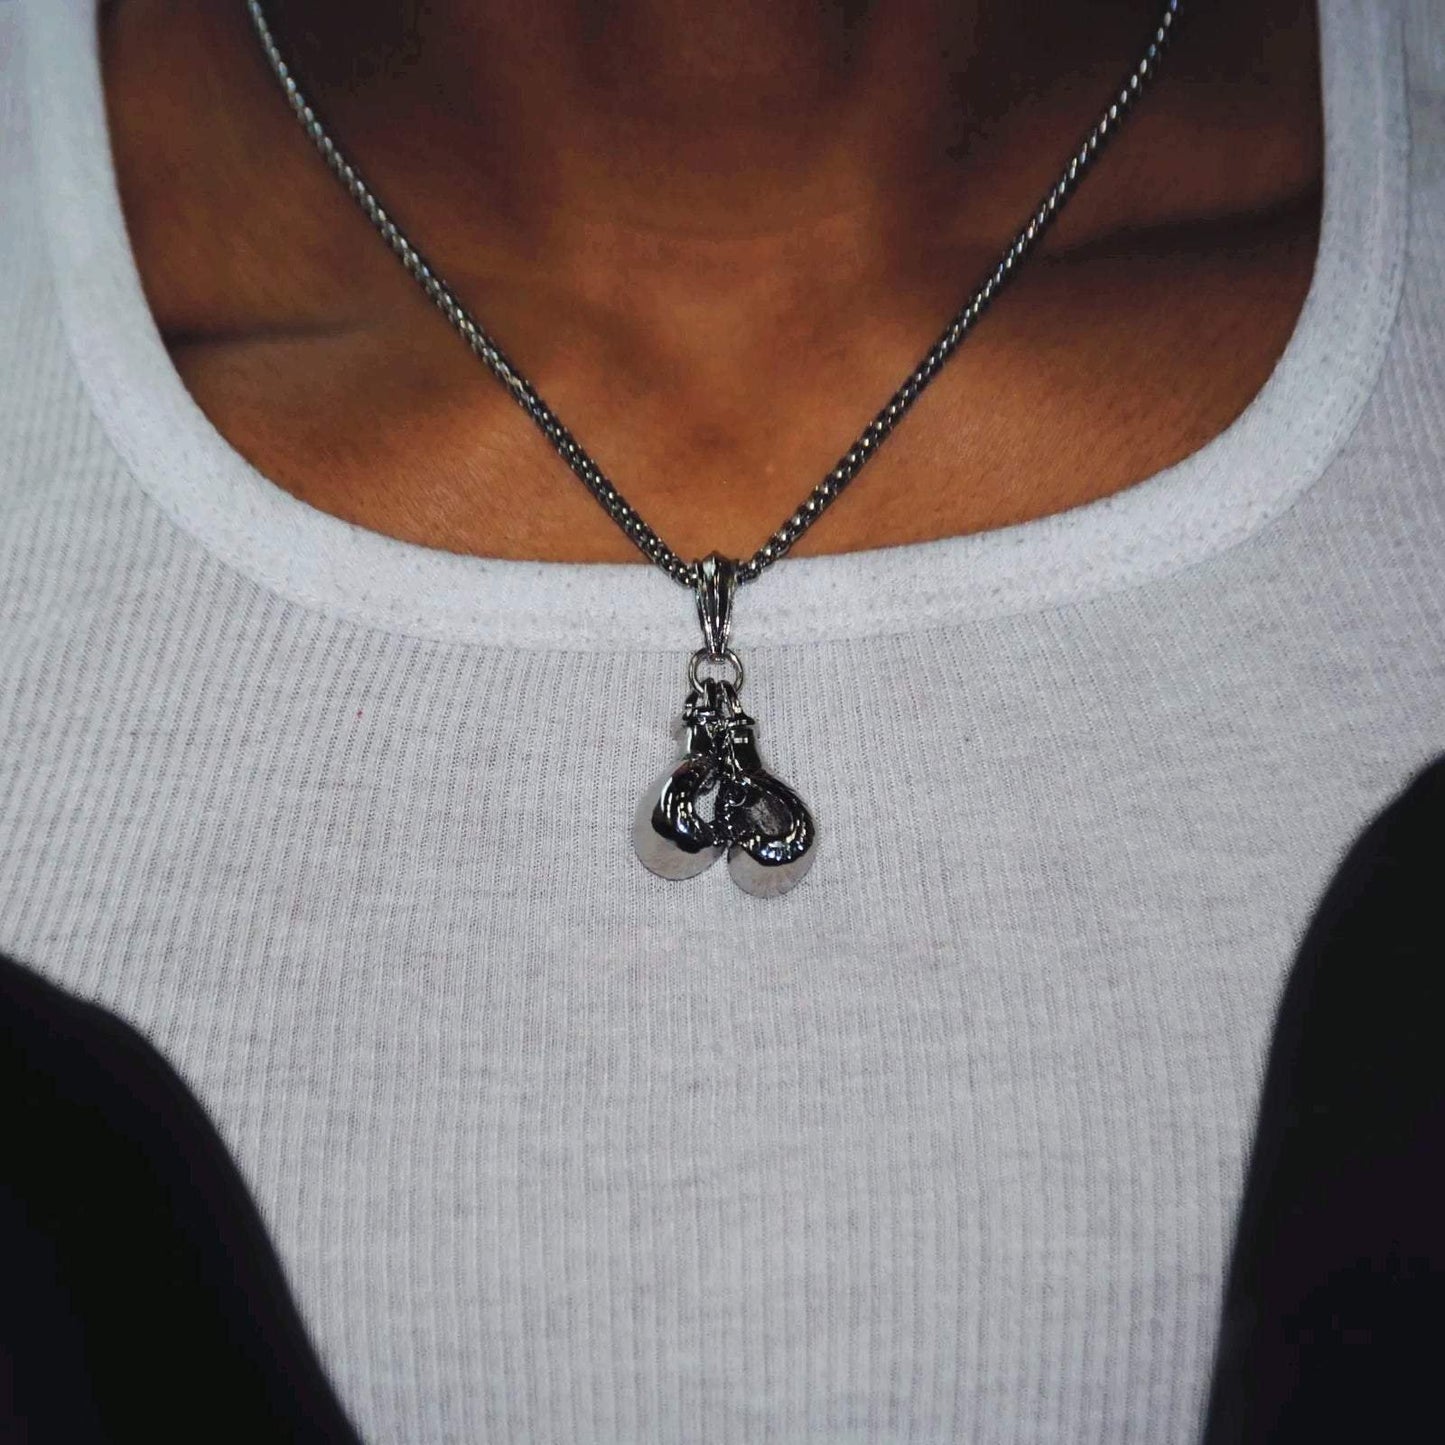 Boxing Gloves Pendant and Chain Necklace - Sportzzheads